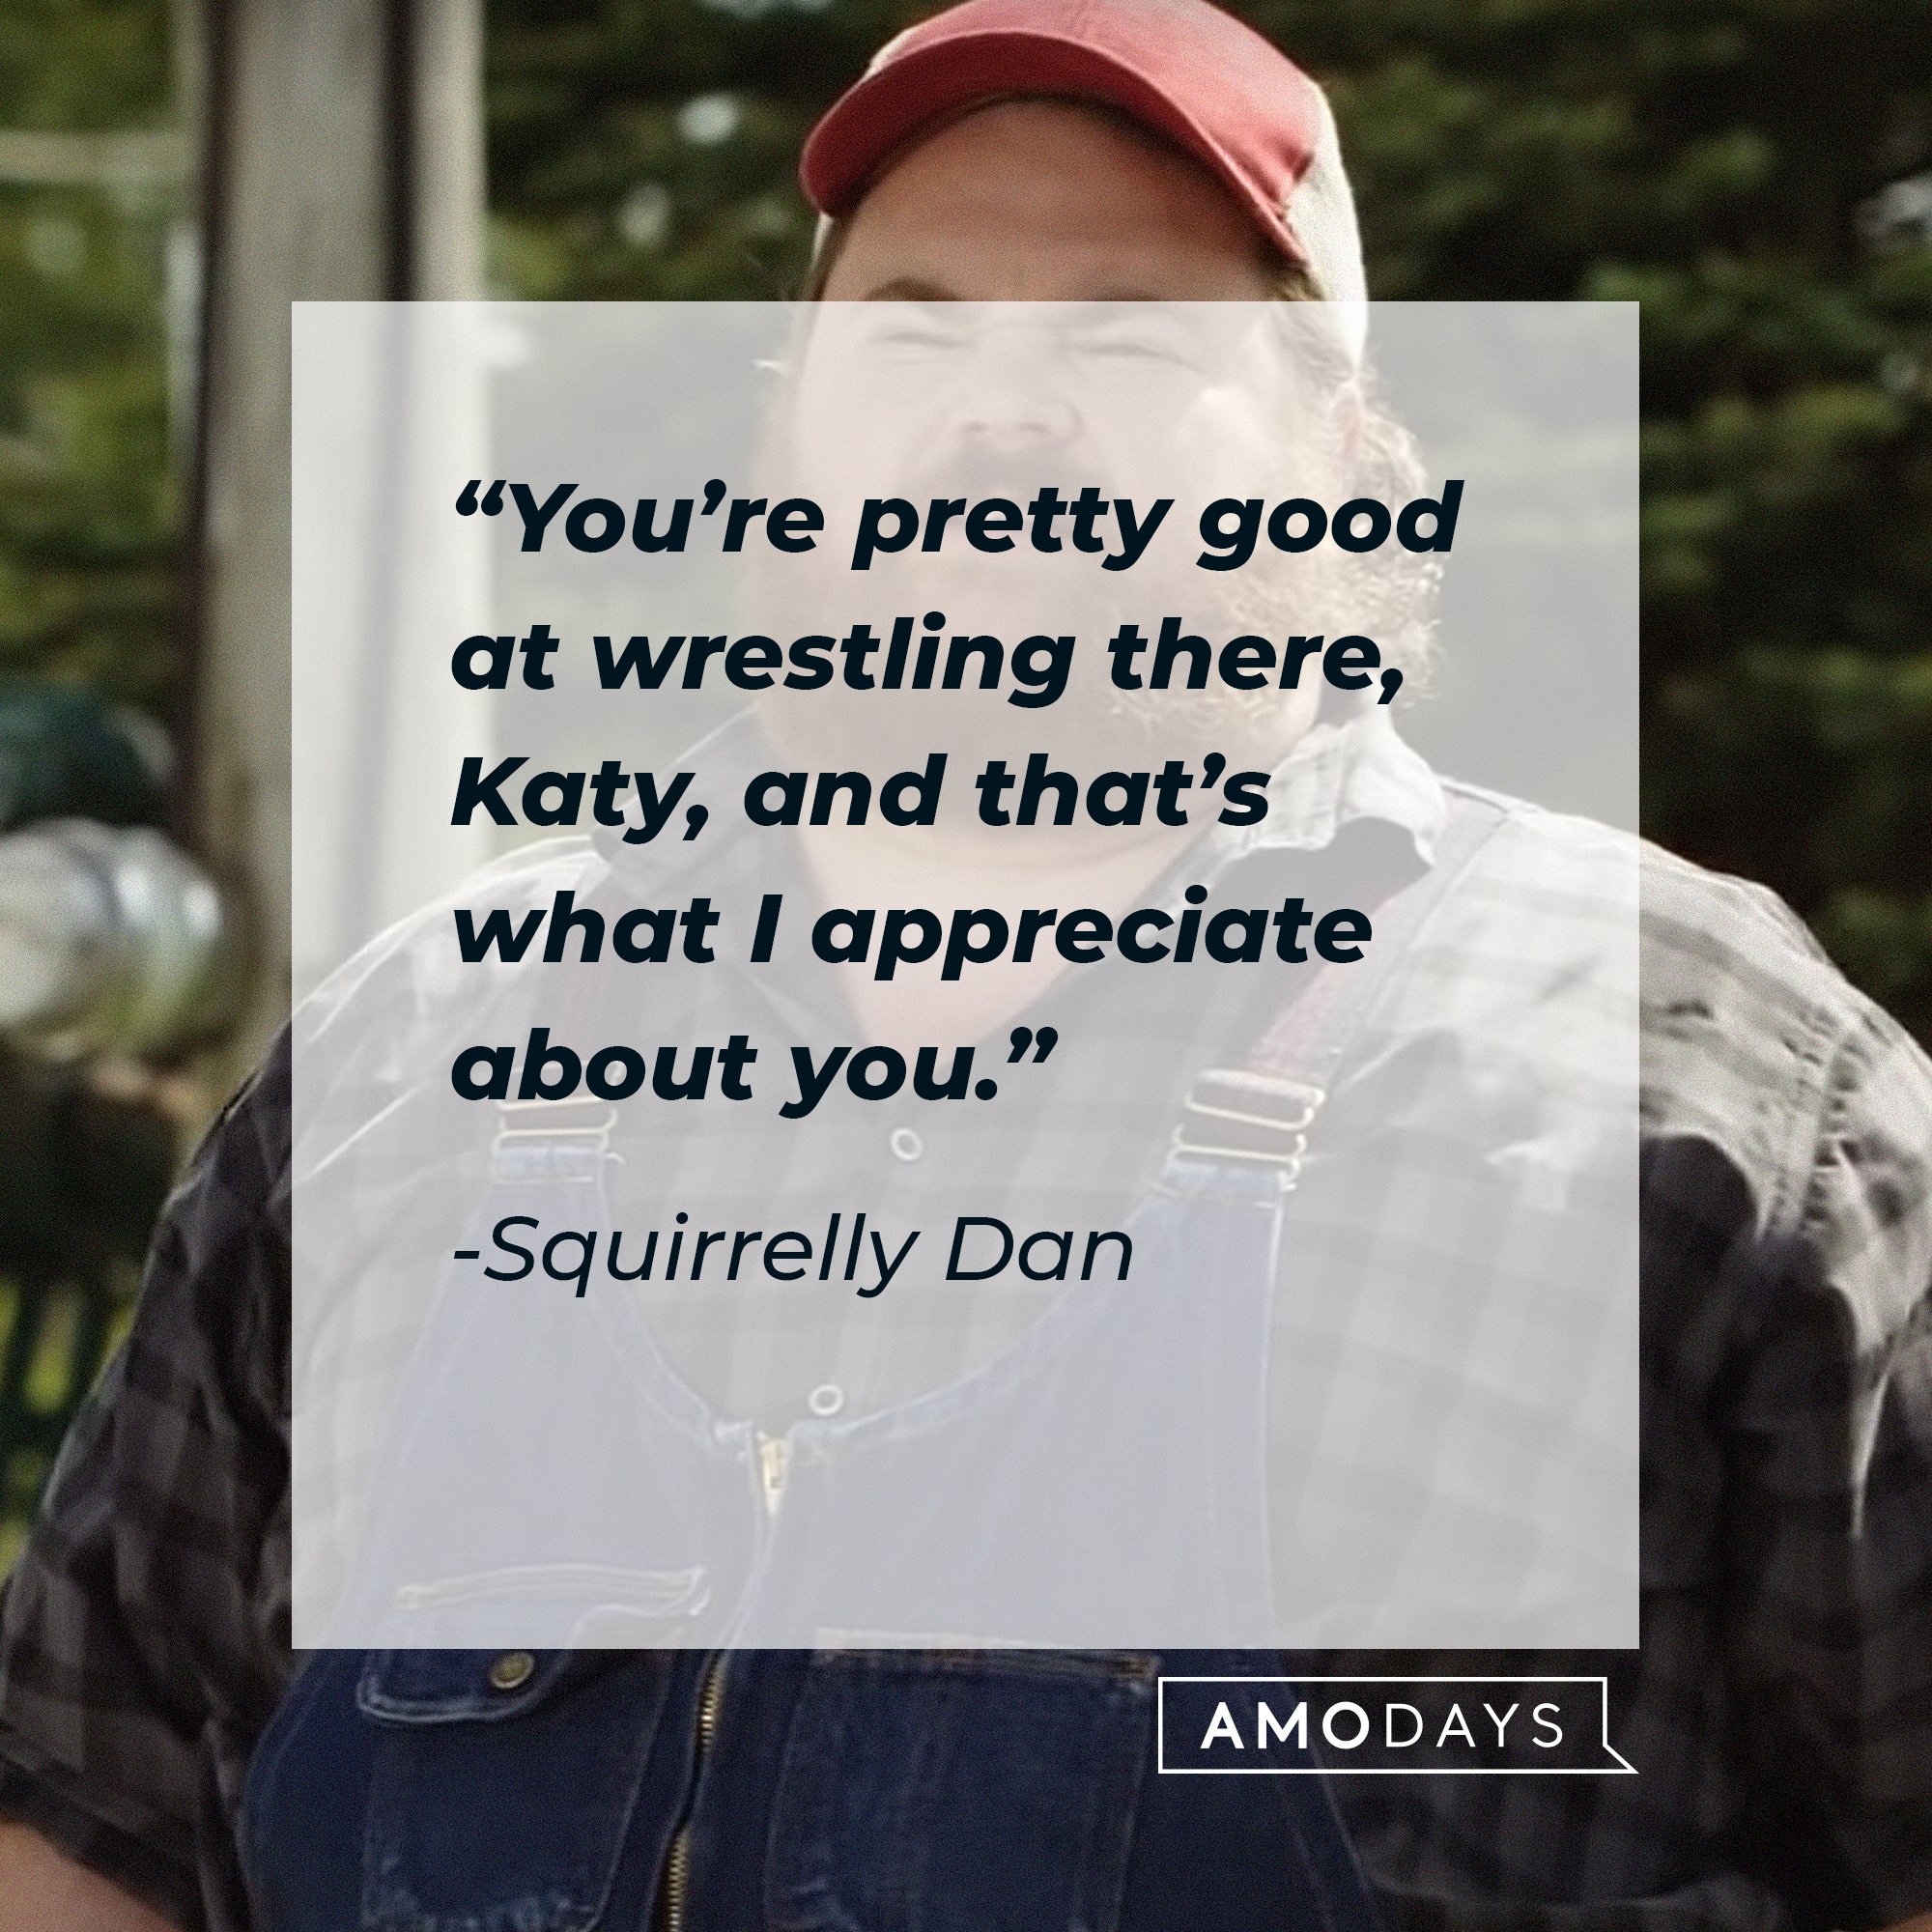 Squirrelly Dan’s quote: “You’re pretty good at wrestling there, Katy, and that’s what I appreciate about you.”  | Image: AmoDays